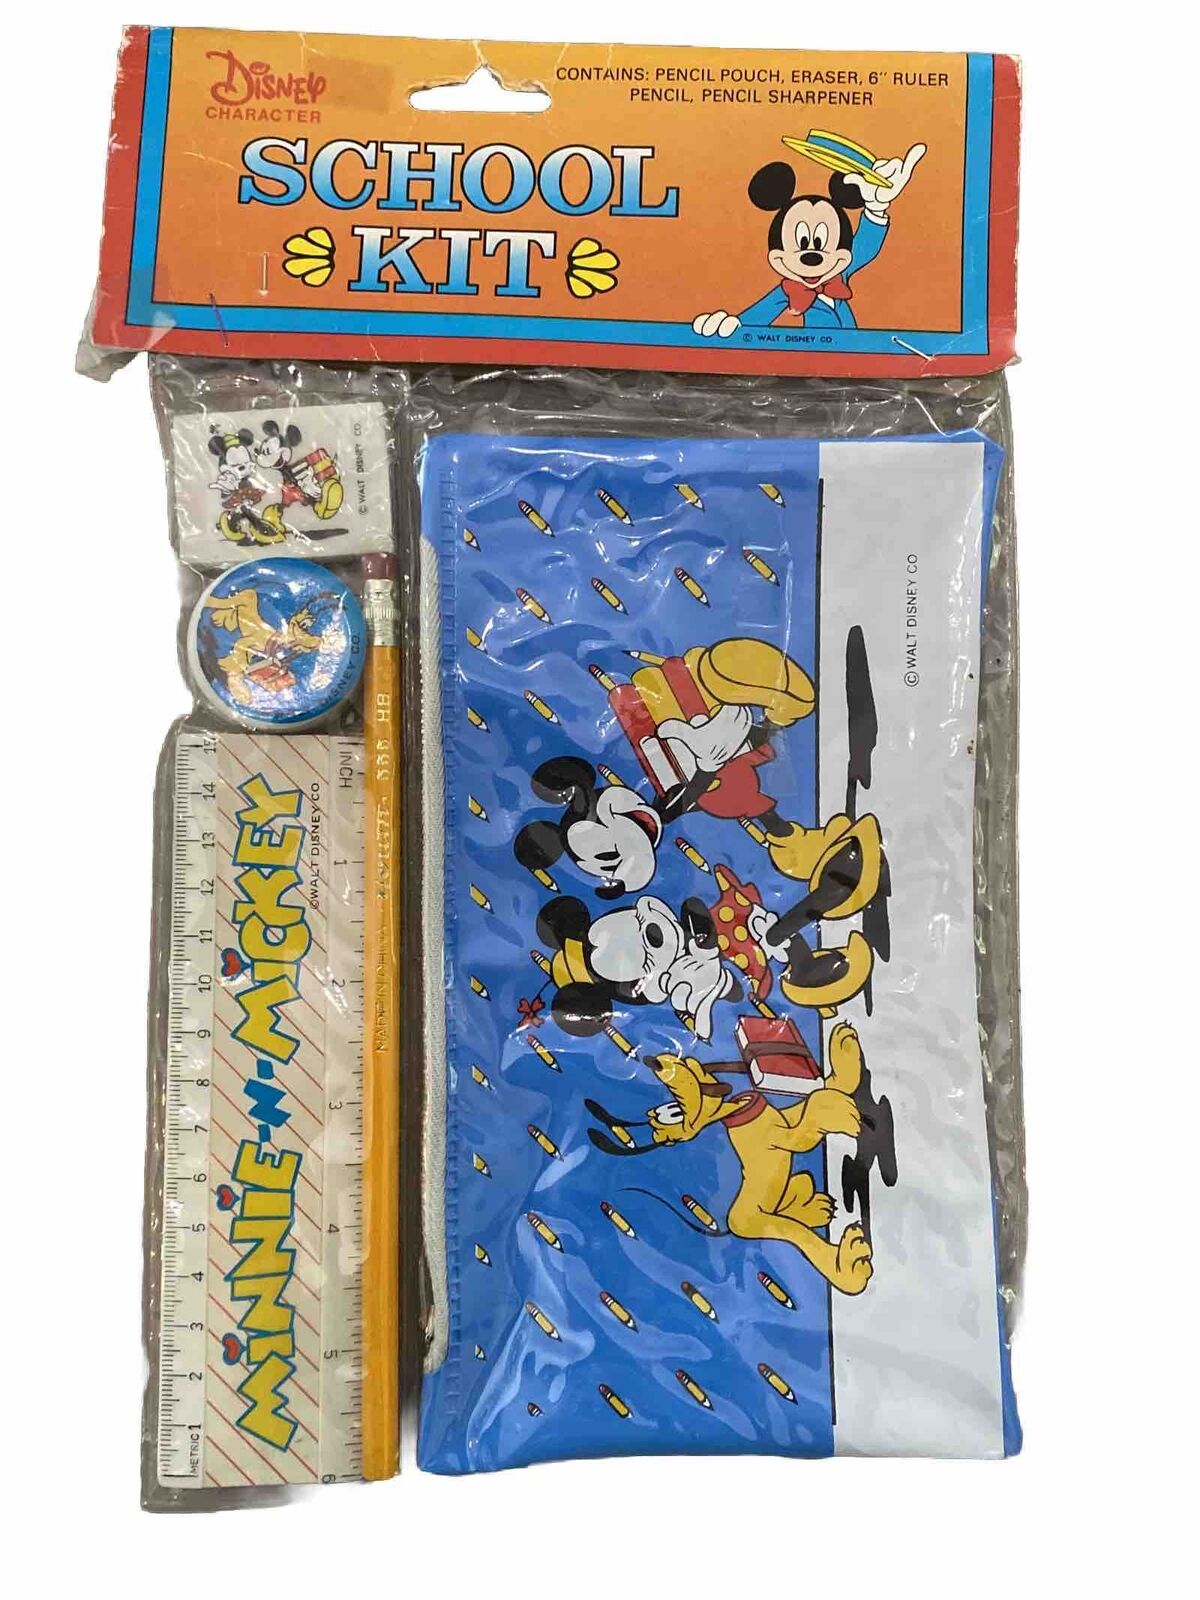 Vintage Disney School Kit With Mickey And Minnie Unopened Collectors Item